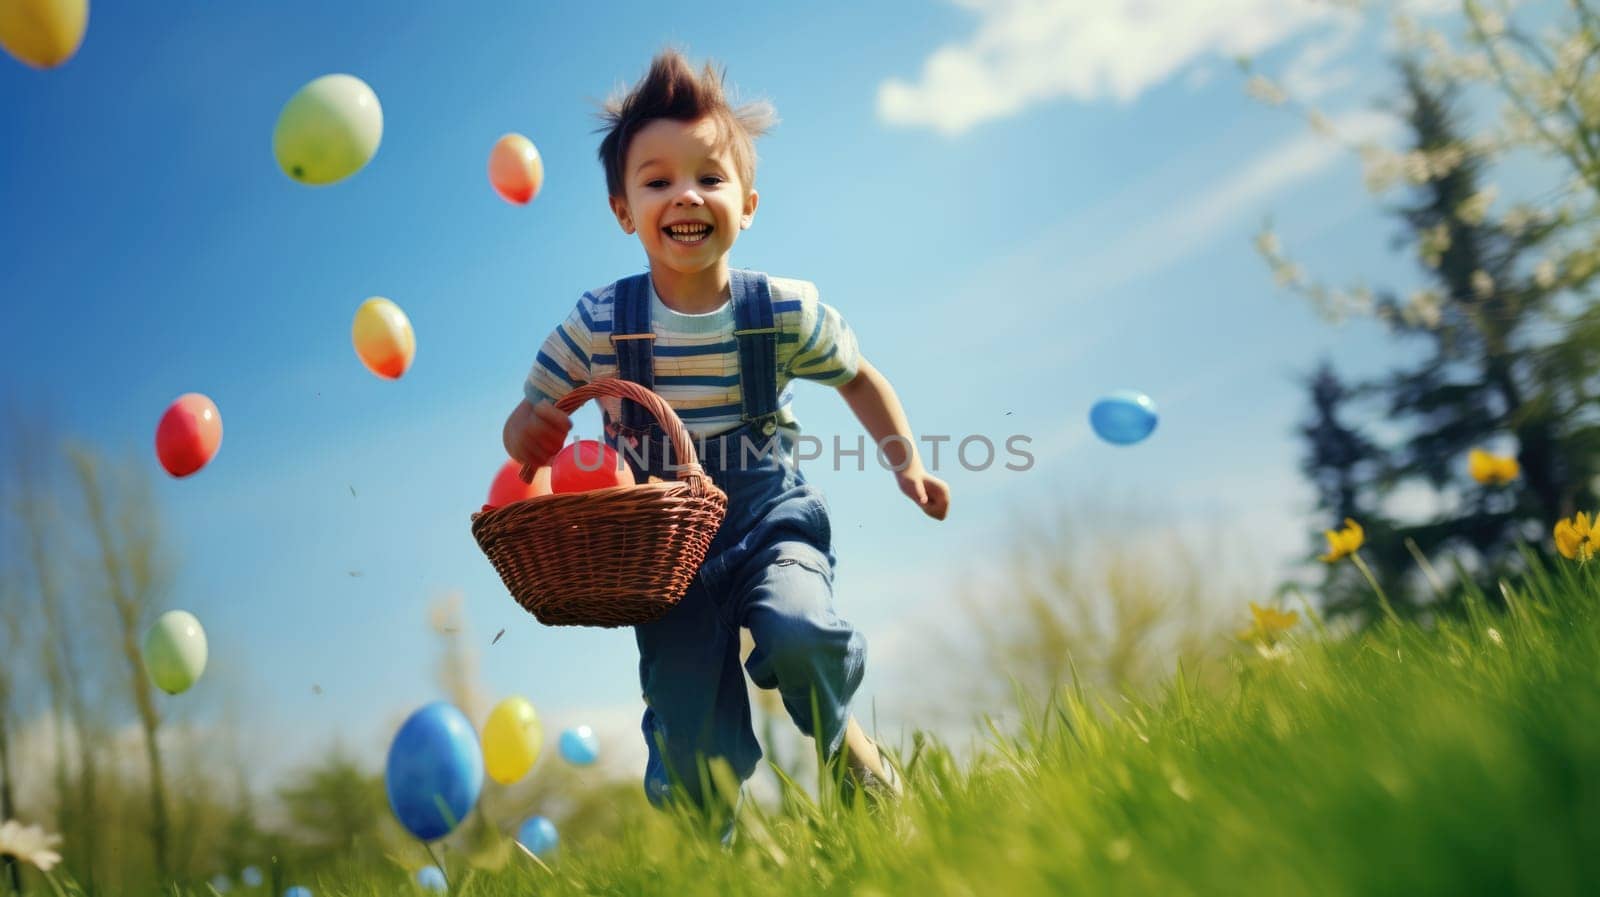 Child excitedly participates in Easter egg hunt, running on green grass with a wicker basket filled with vibrant eggs. Dressed in striped shirt, jeans, sneakers, exuding joy under sunny blue sky.